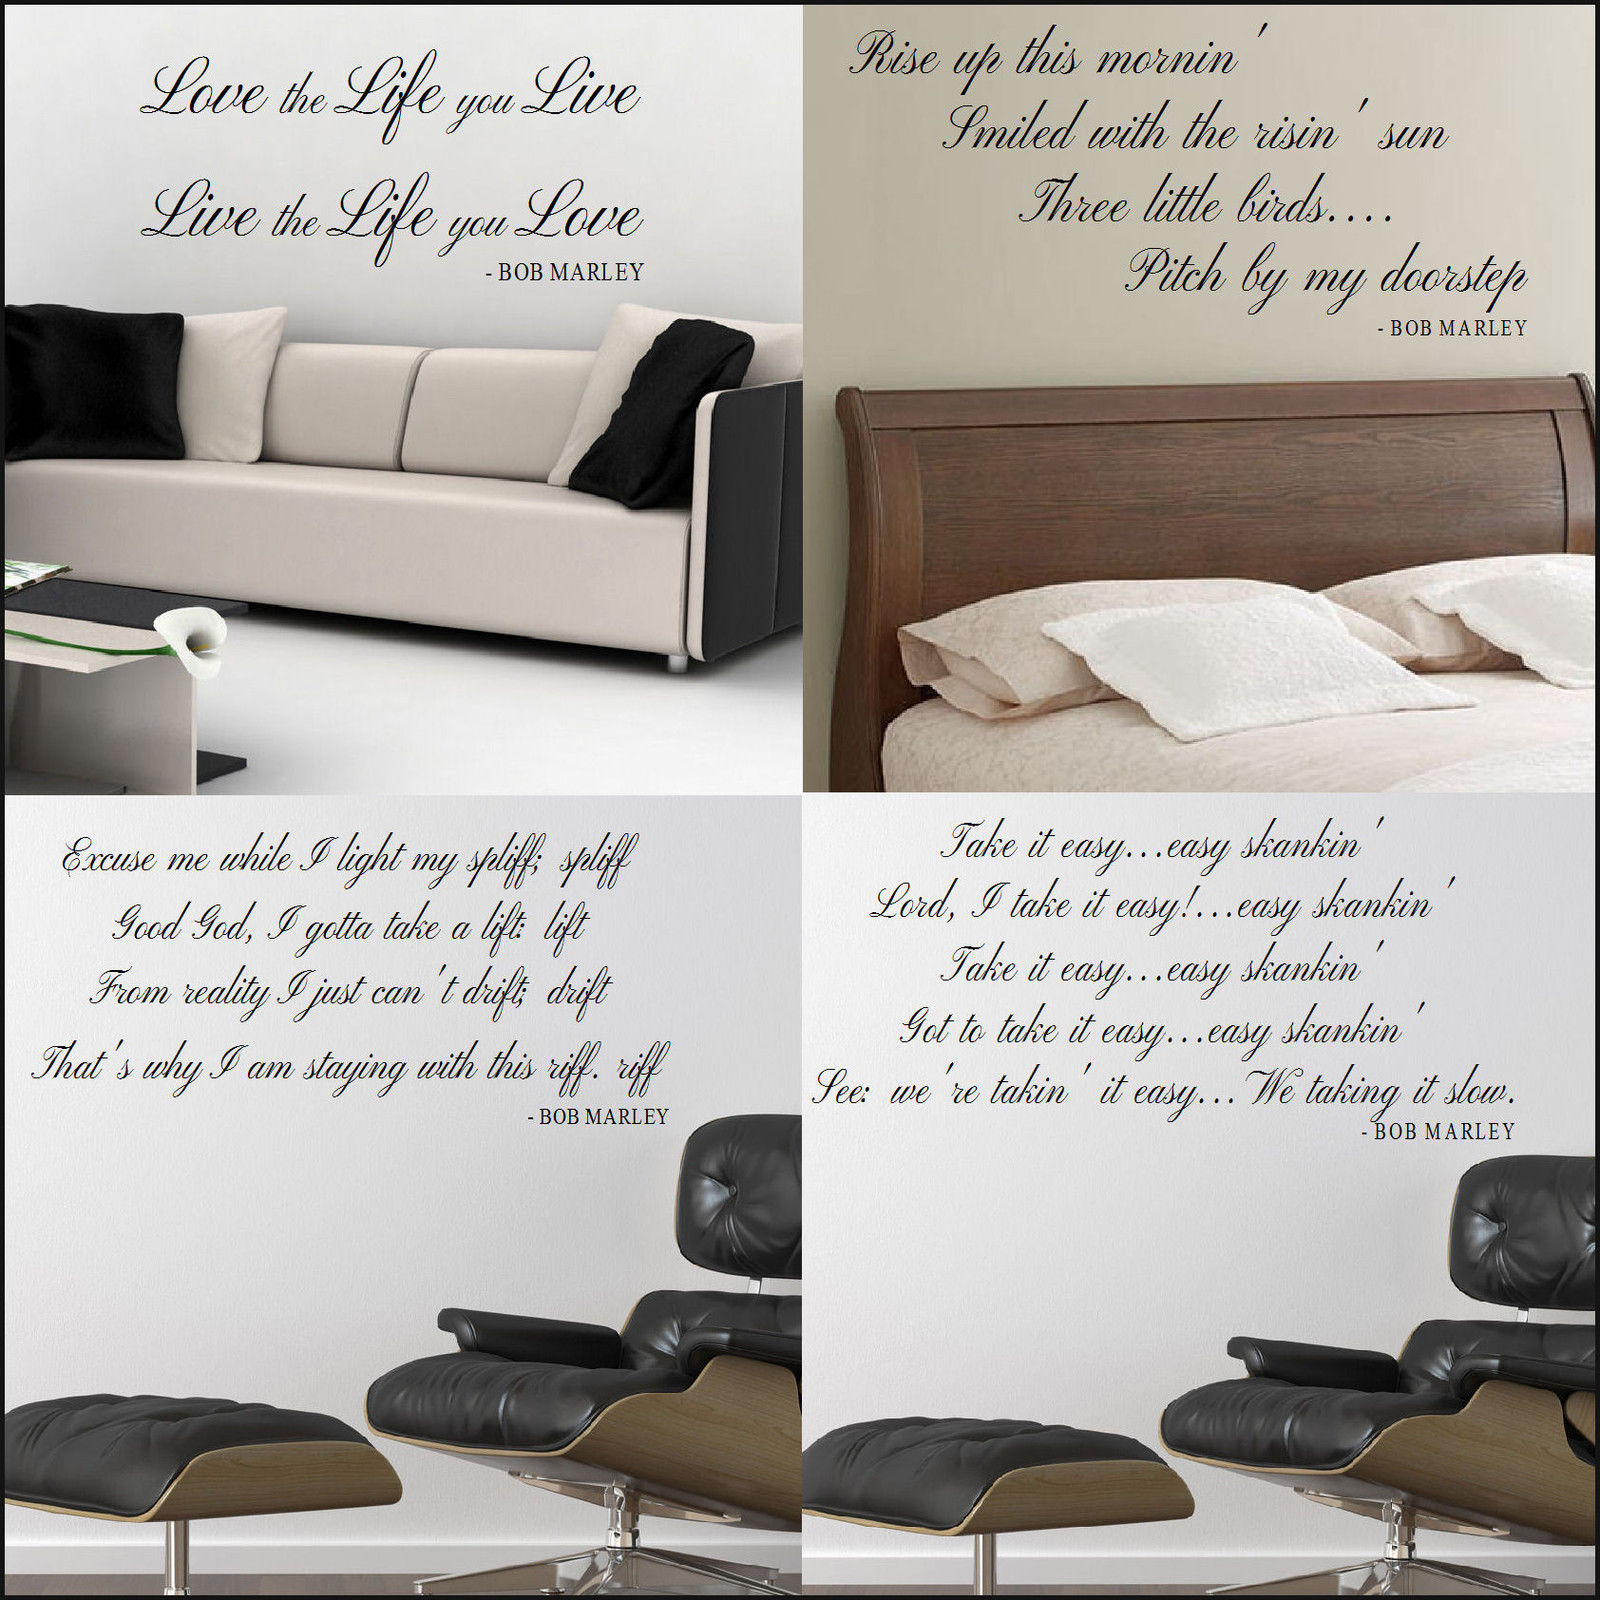 LARGE BOB MARLEY WALL STICKER QUOTE LOVE THE LIFE YOU LIVE TRANSFER